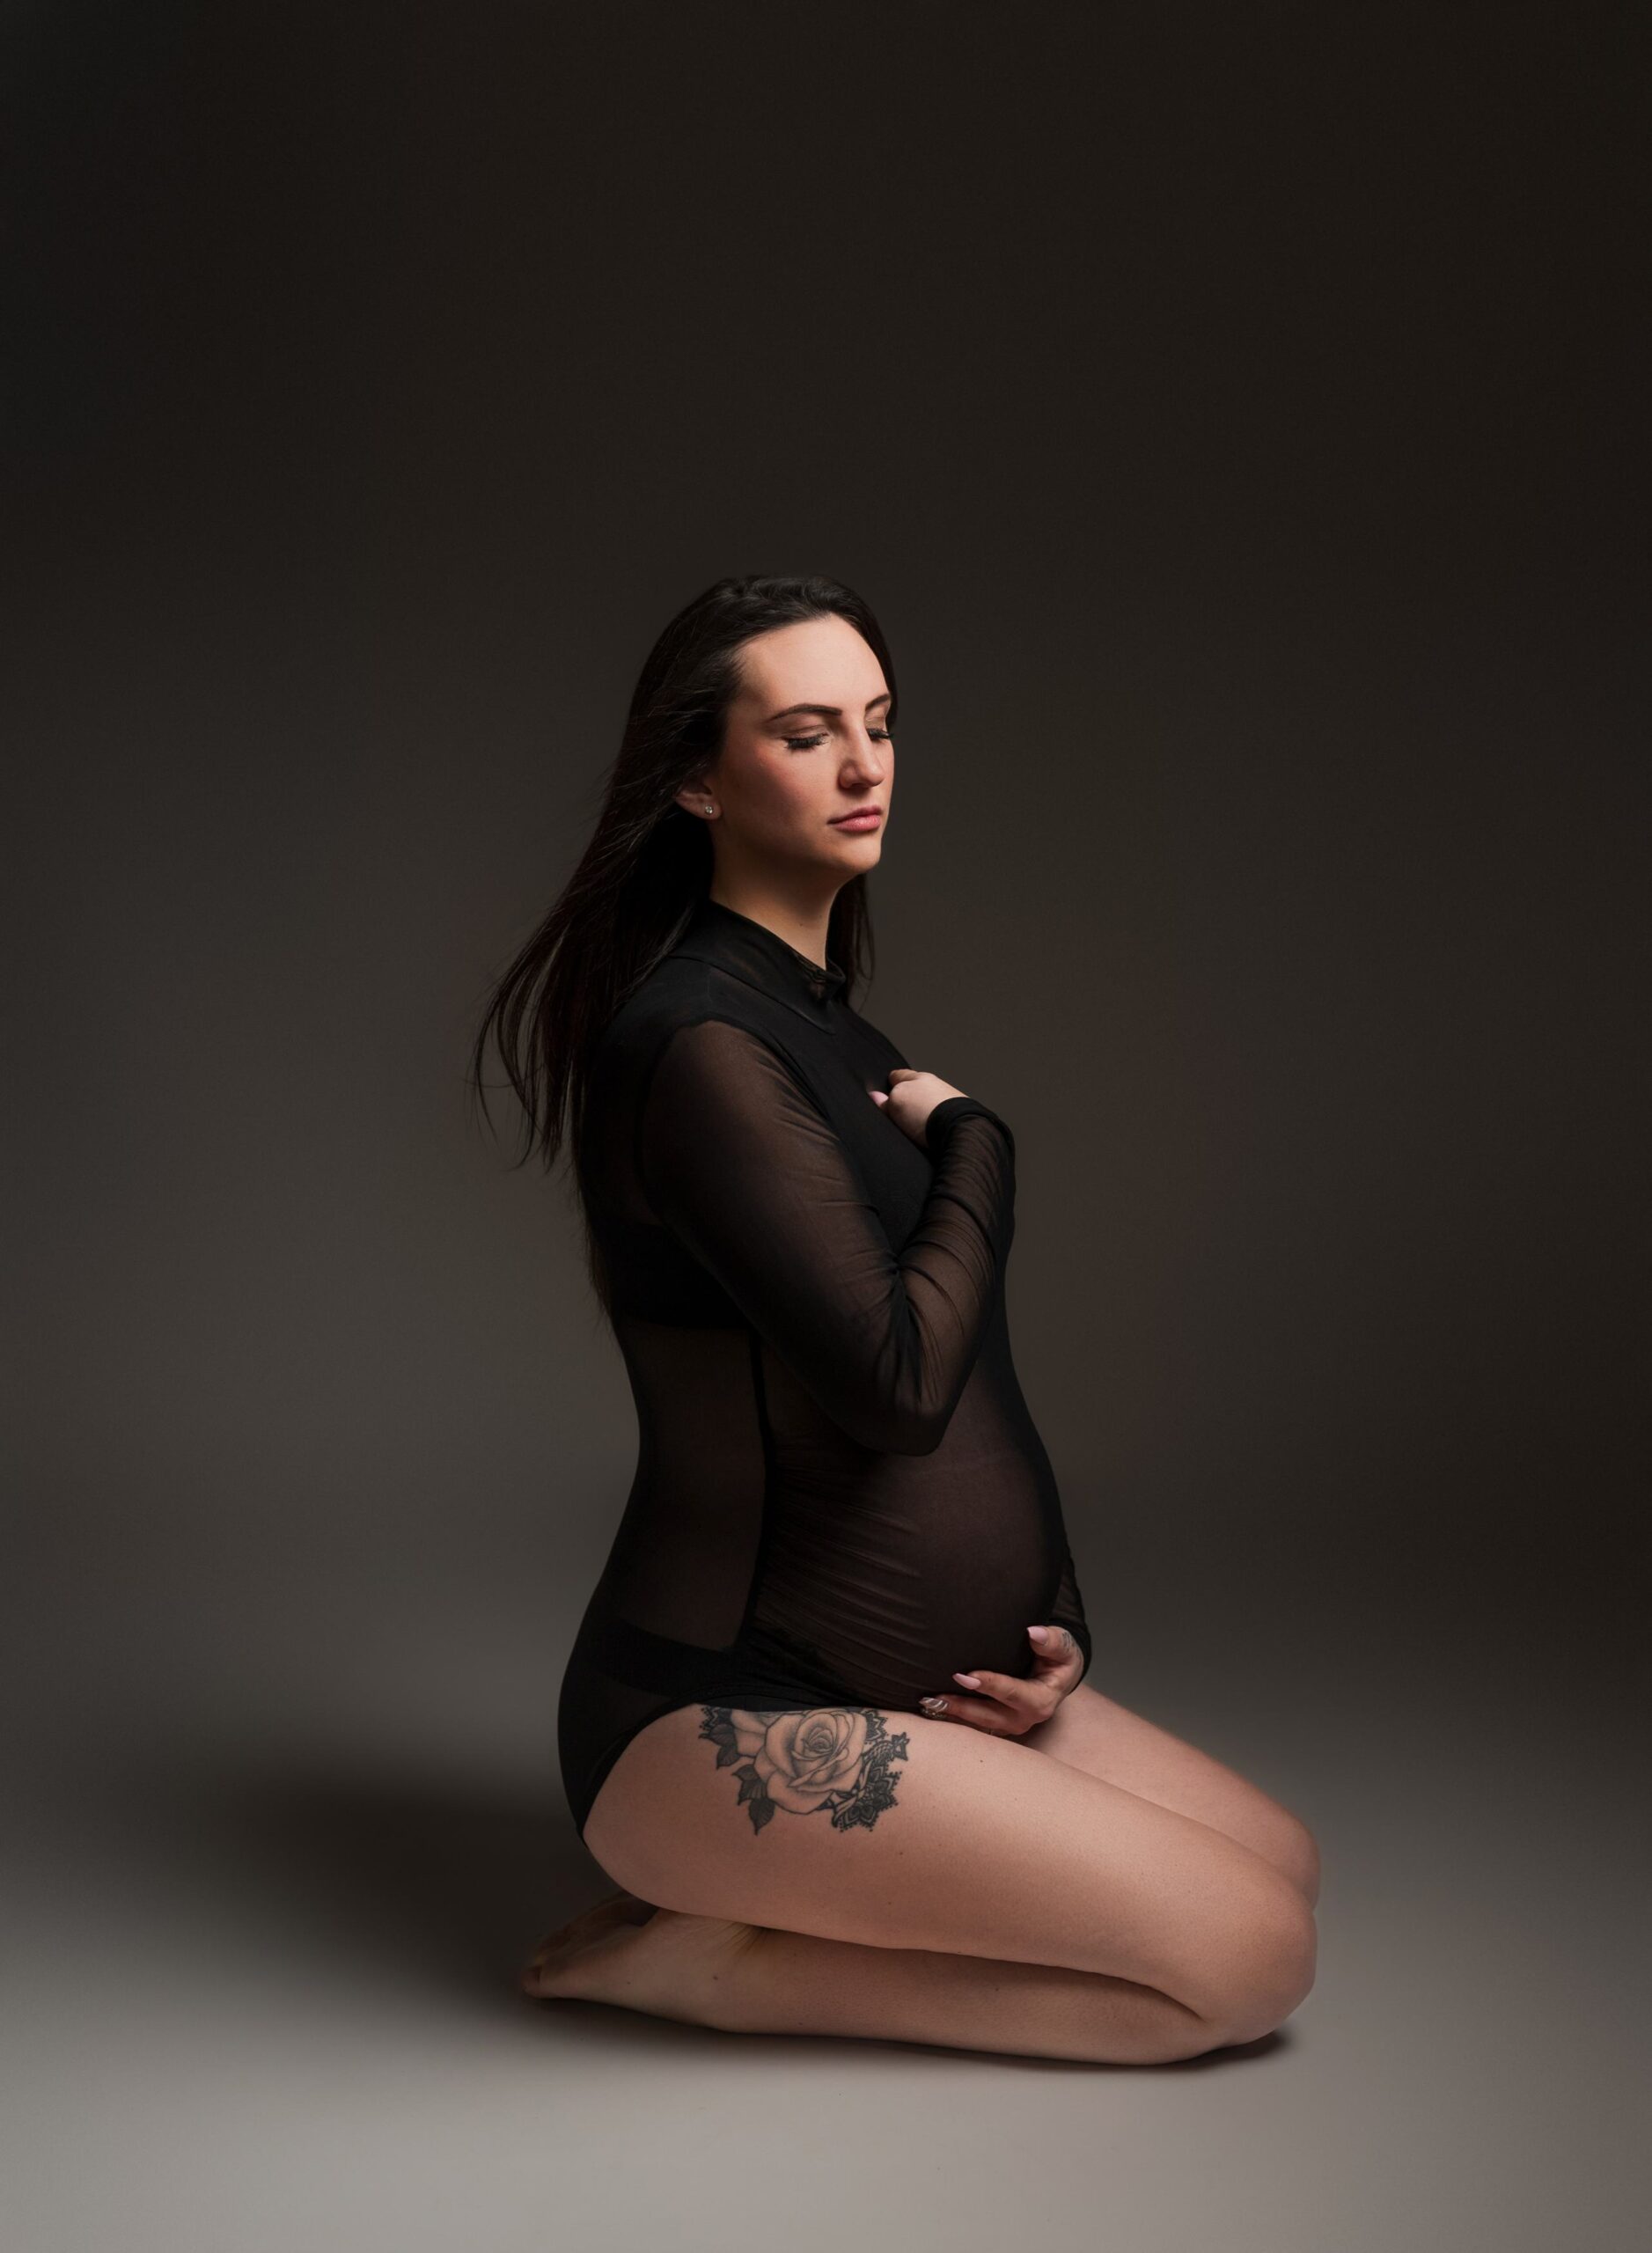 Maternity portrait if a women wearing a black body suit and kneeling on her knees with eyes closed. 